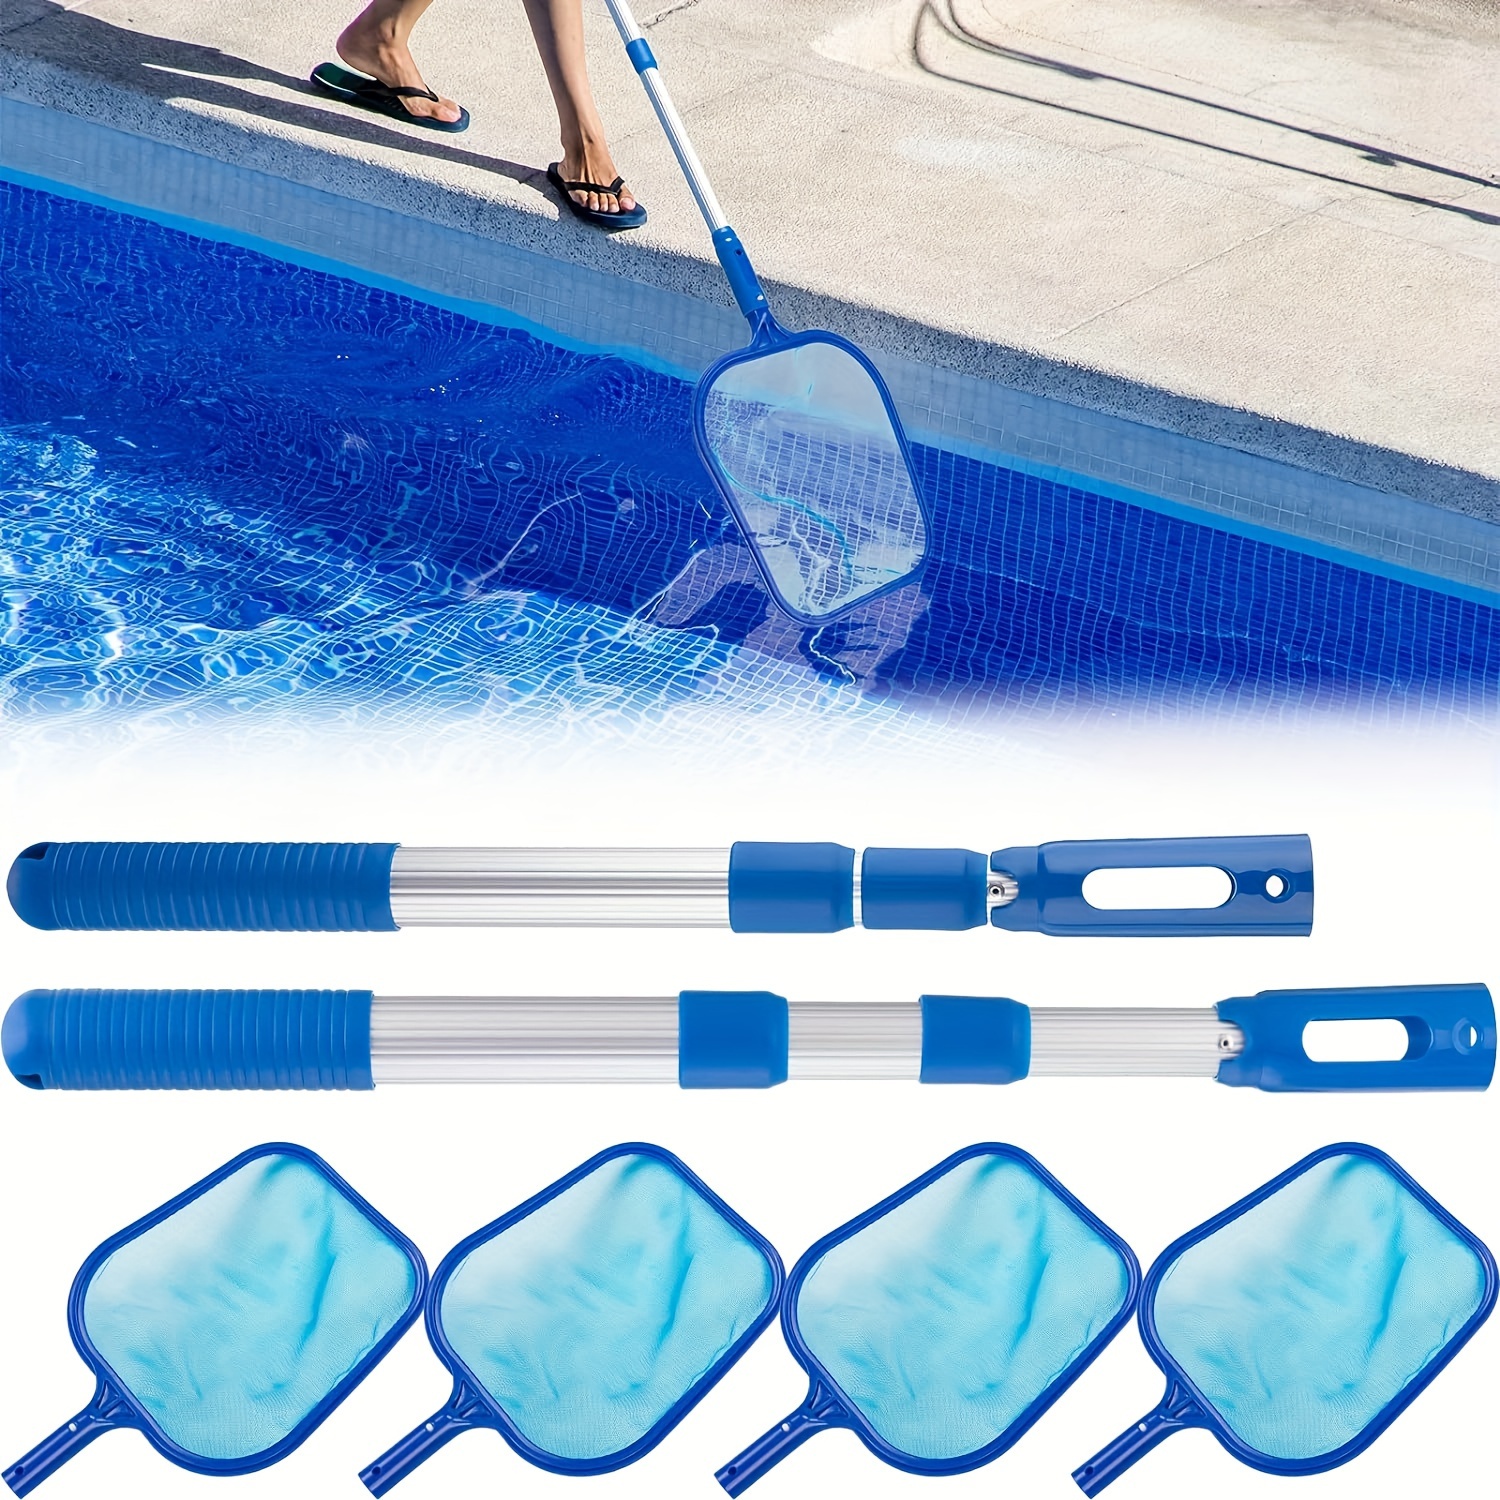 4 Packs, Pool Skimmer Net Pool Nets For Cleaning Fine Mesh Pool Leaf Net  Skimmer And 2 Pcs Adjustable Telescopic 3 Section Poles For Above Ground  Pond